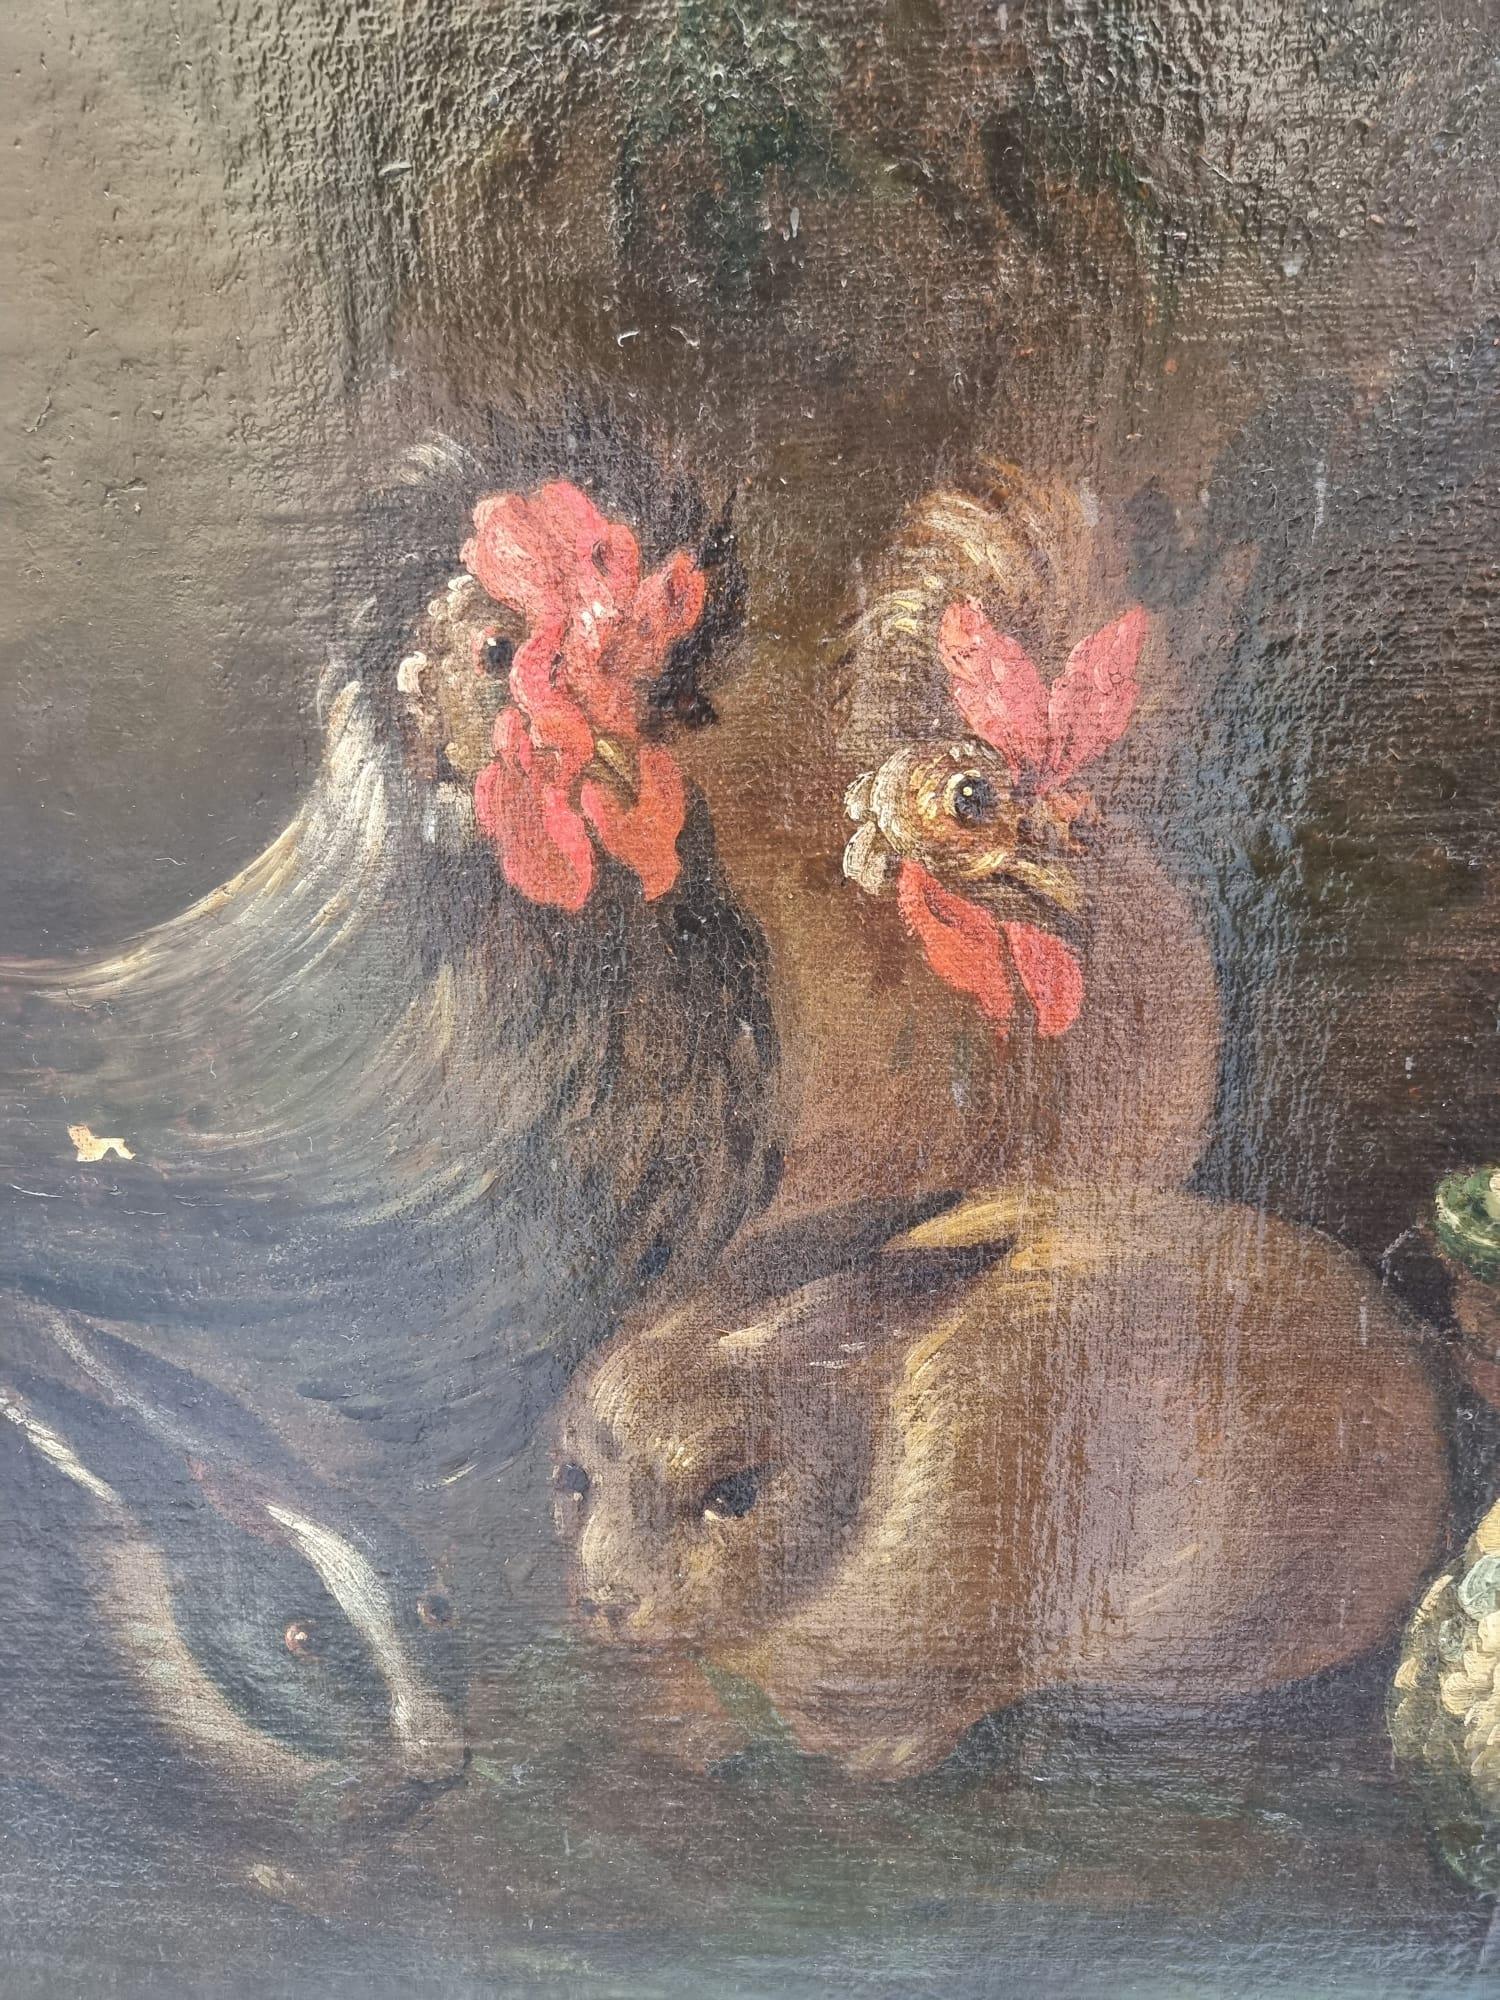 Still life oil painting on canvas depicting pumpkins, rabbits and chickens. Tuscany XVII century.
The painting needs very small restoration. It has been relined.
